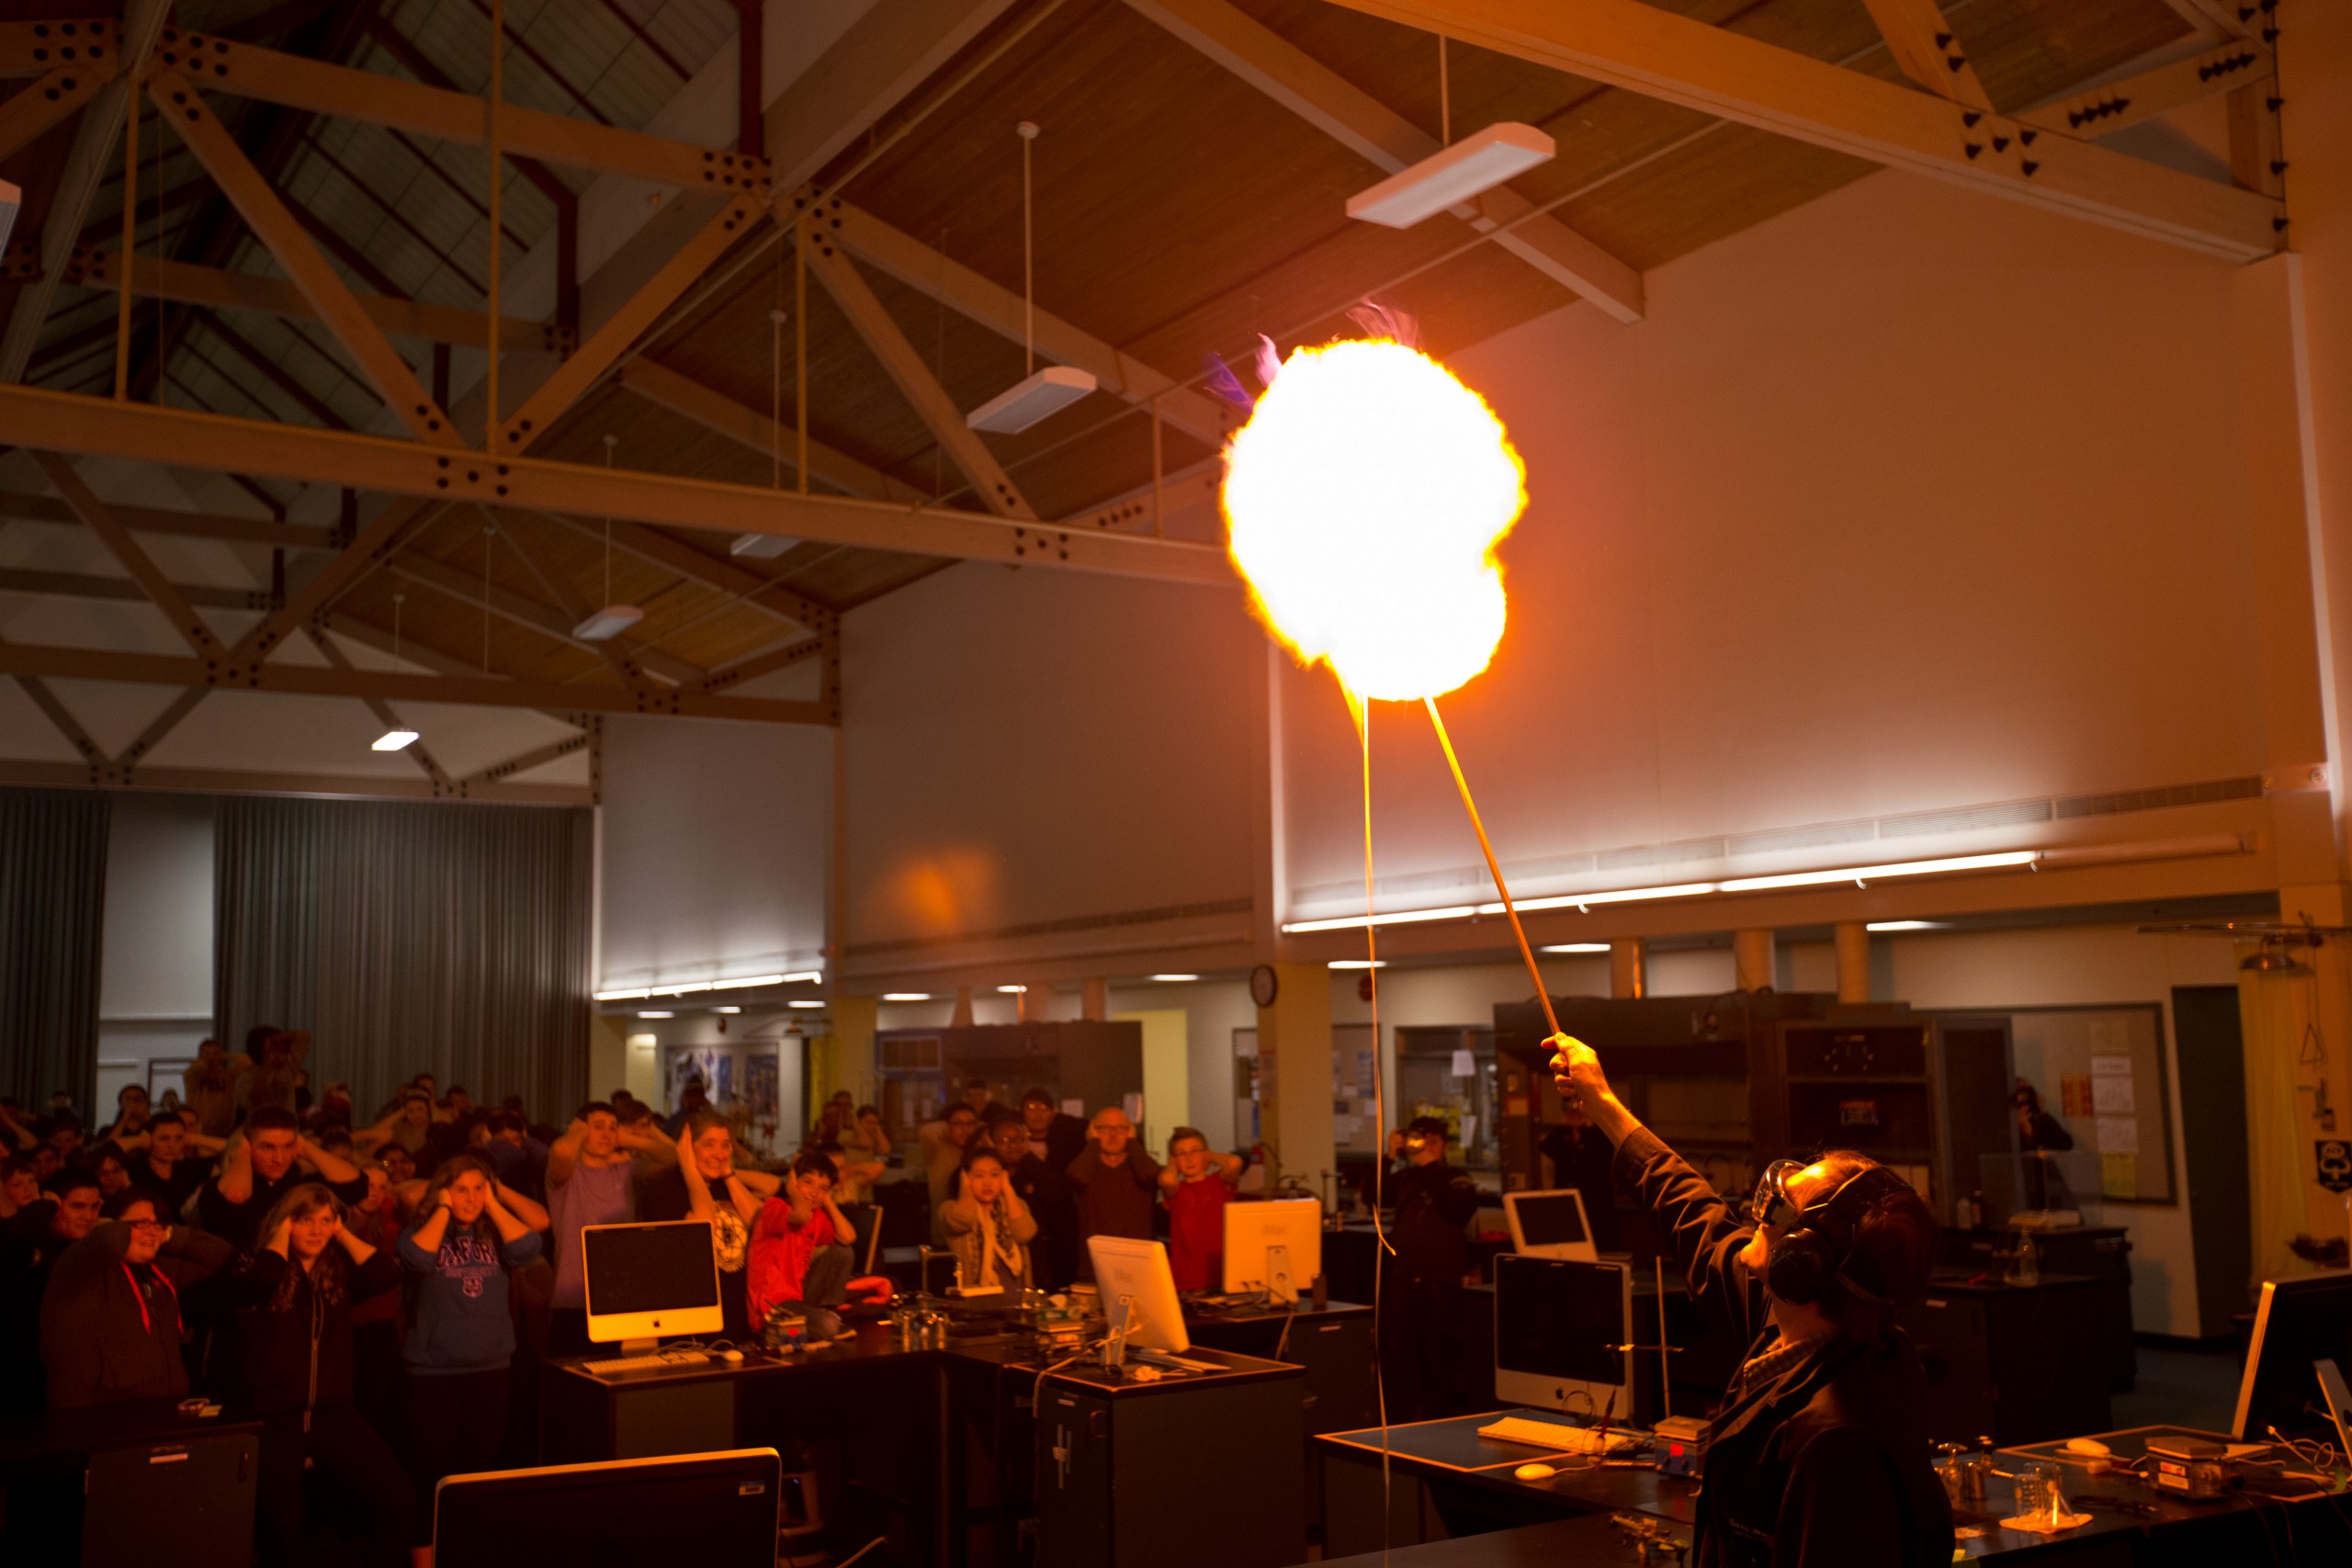 Students cover their ears as a balloon filled with hydrogen and oxygen bursts during the Chemistry Department’s Desserts and Demos Night on April 15. (Photo: John Froschauer/PLU)